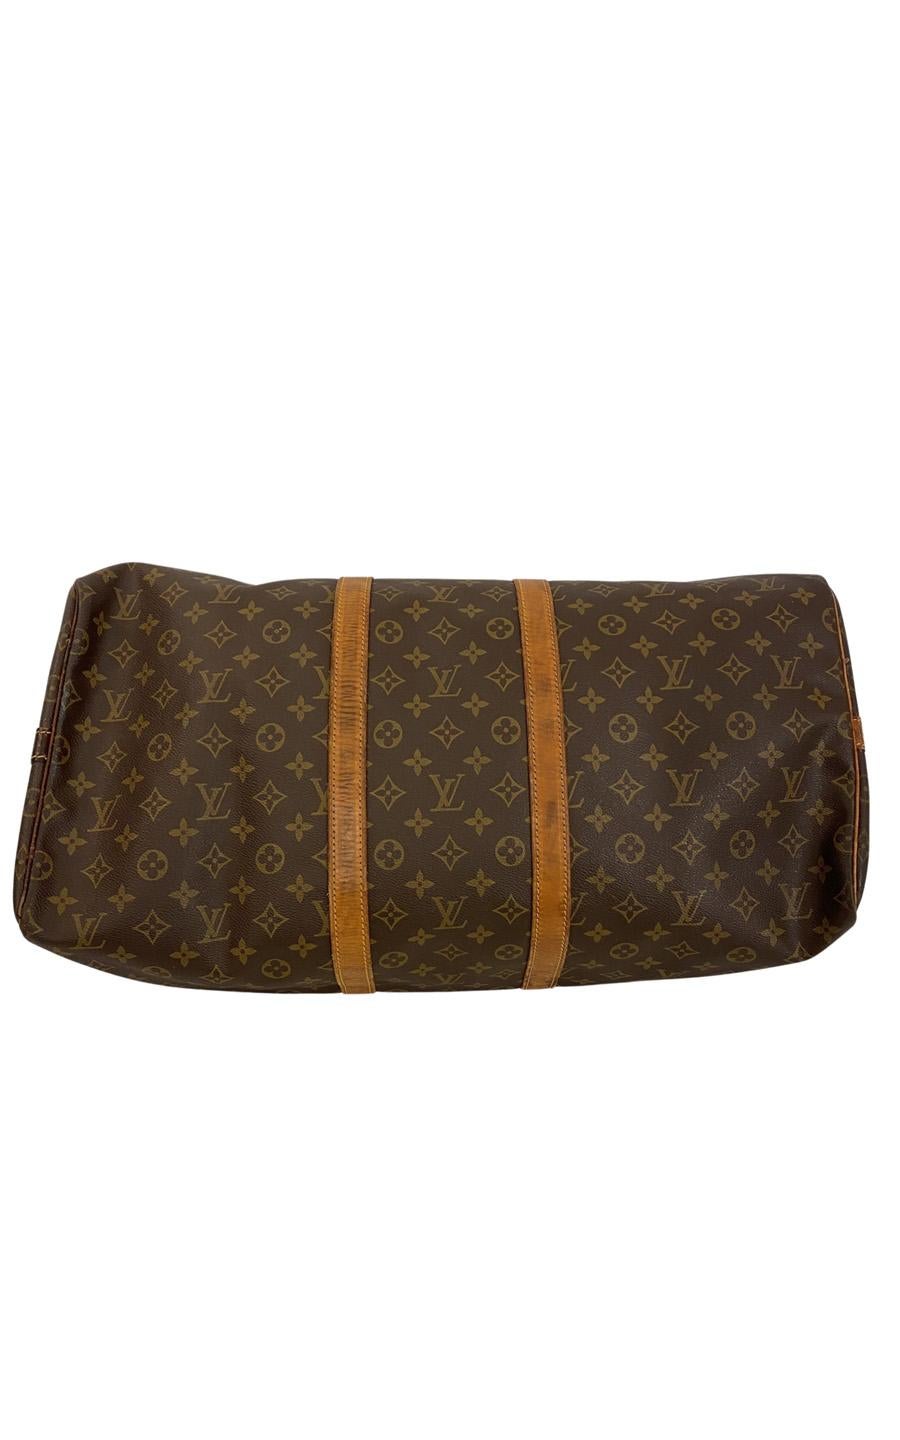 louis vuitton keepall 55 with shoulder strap